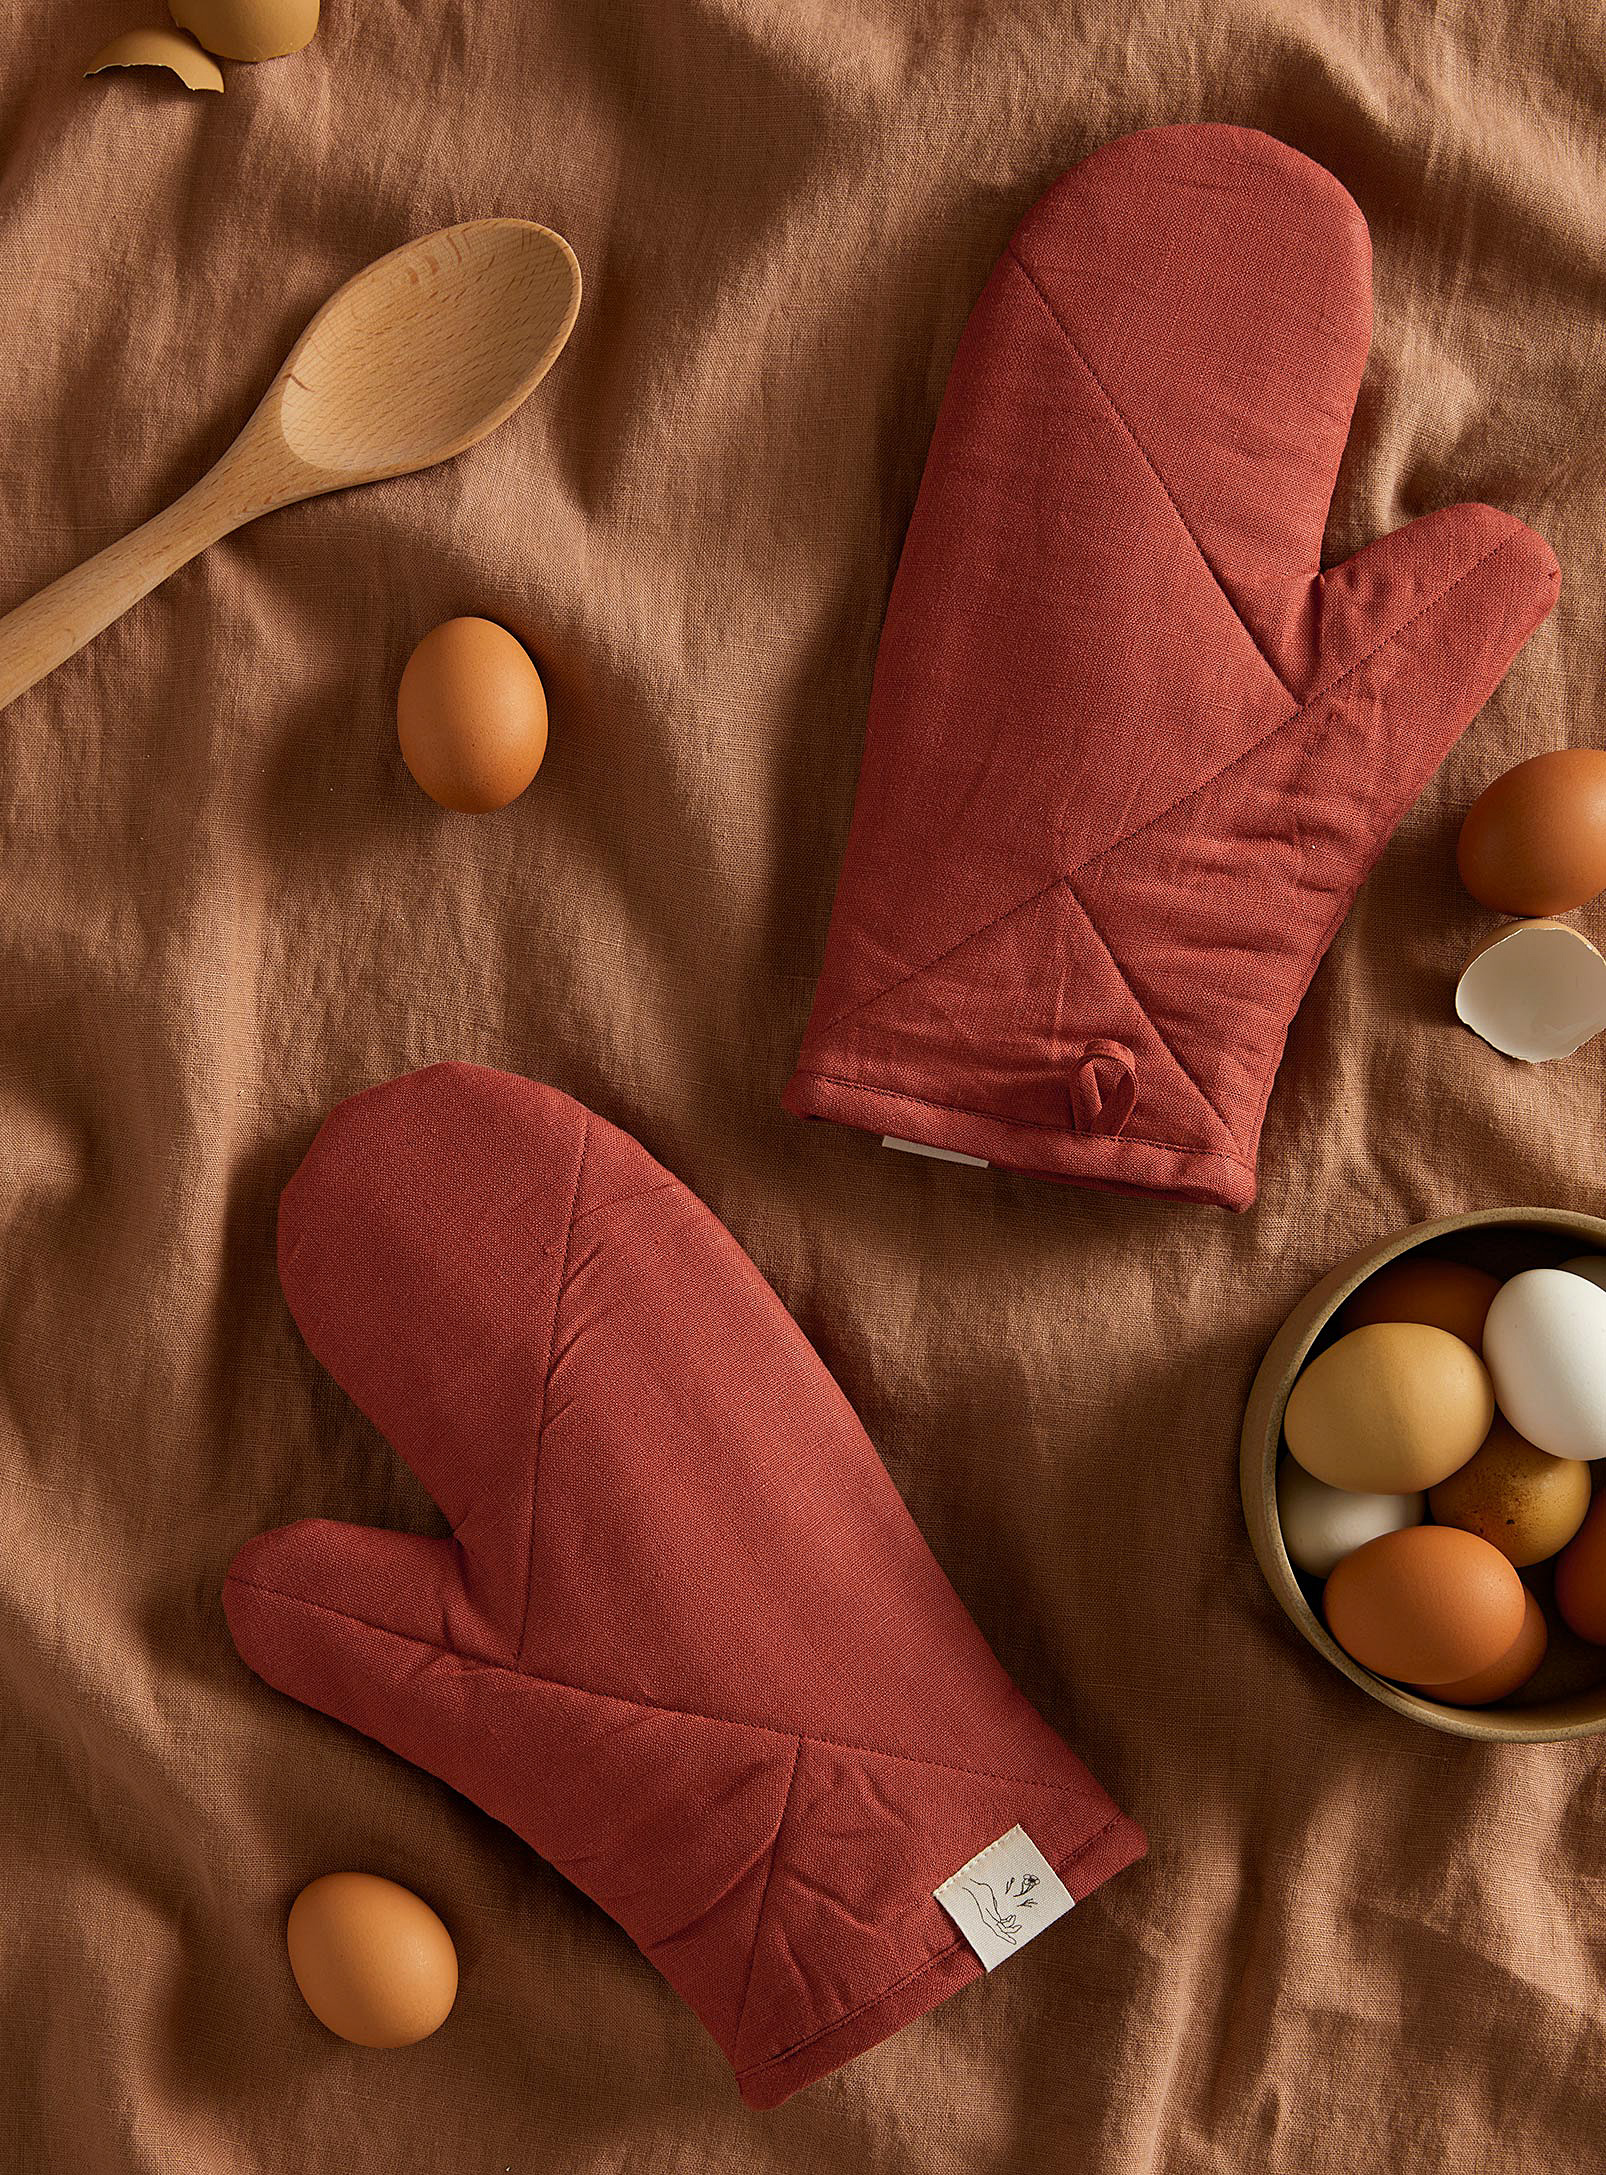 Confetti Mill Linen Oven Mitts Set Of 2 In Red